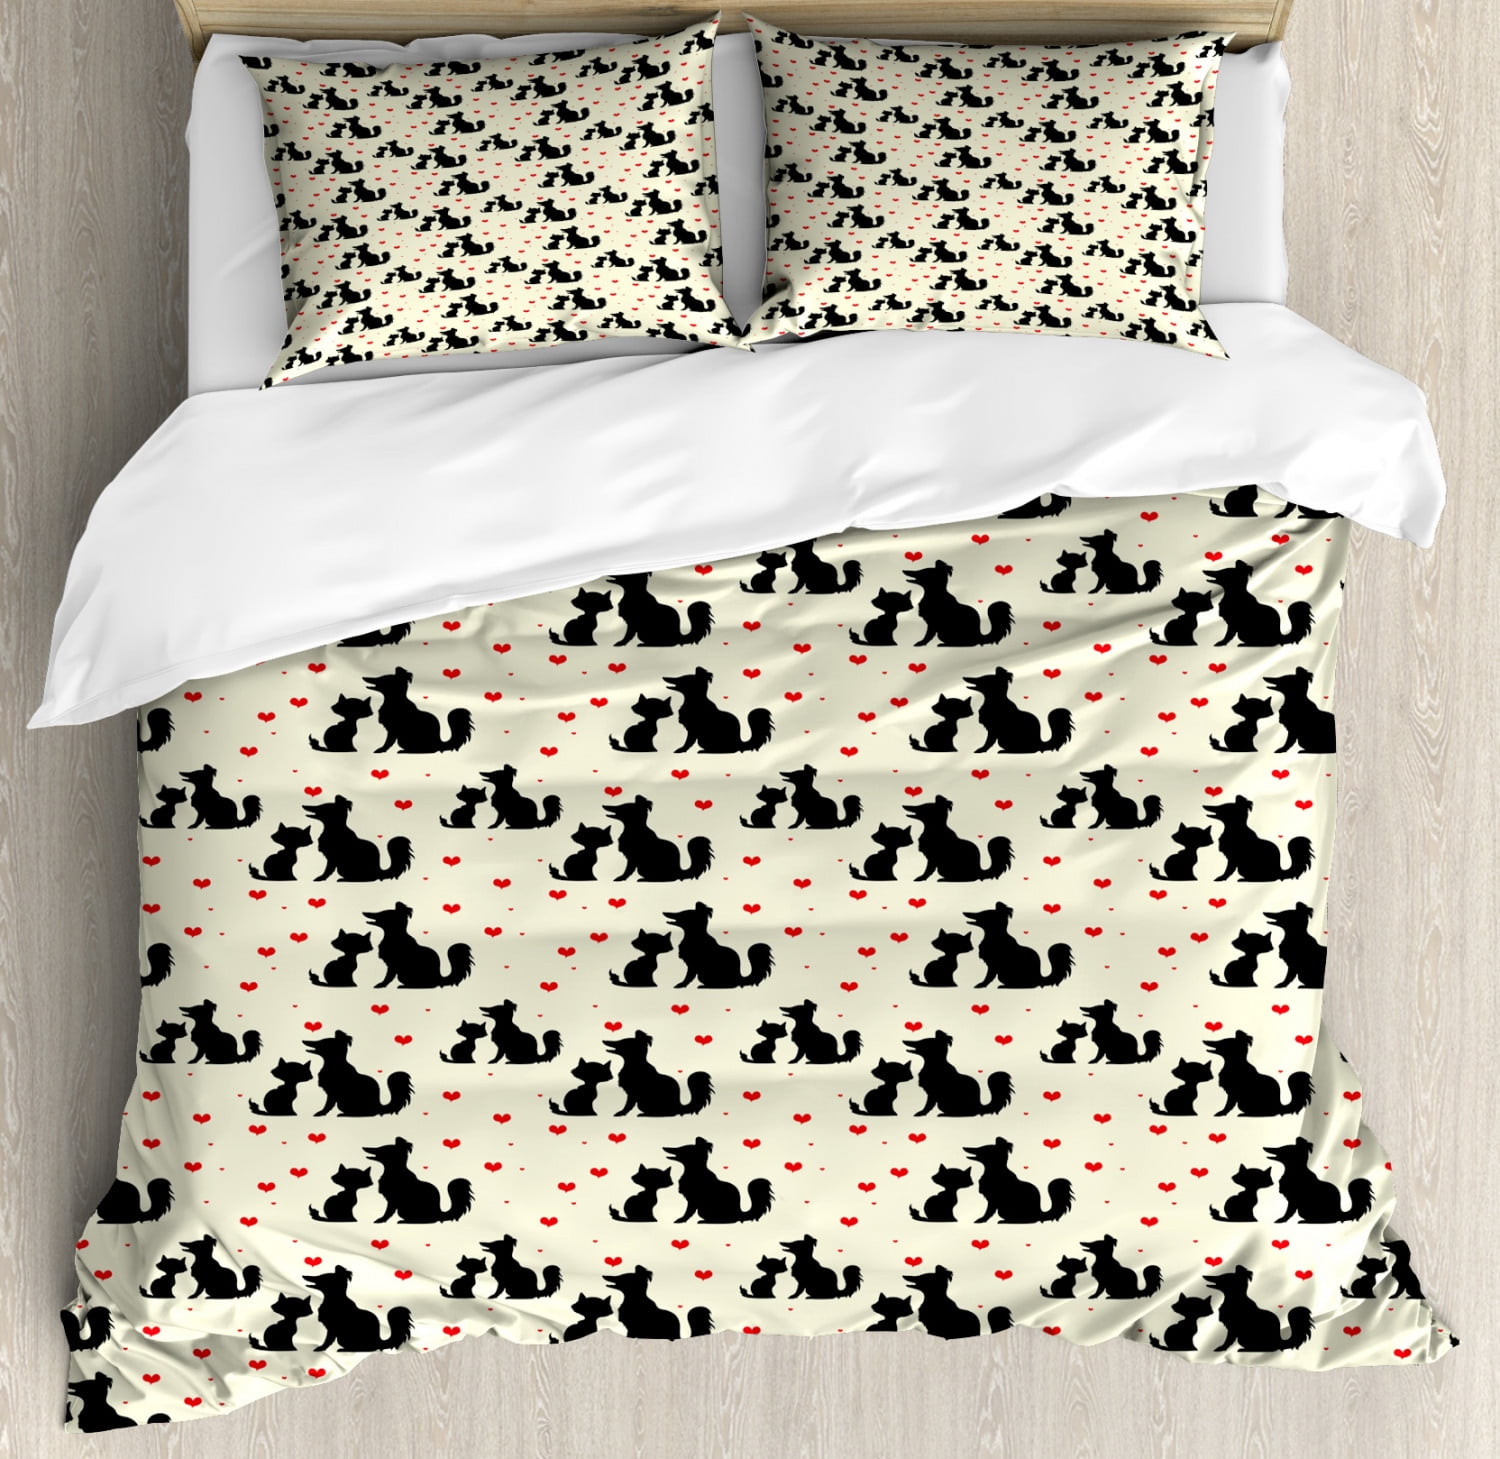 Red And Black Duvet Cover Set Black Dog And Cat Silhouettes With